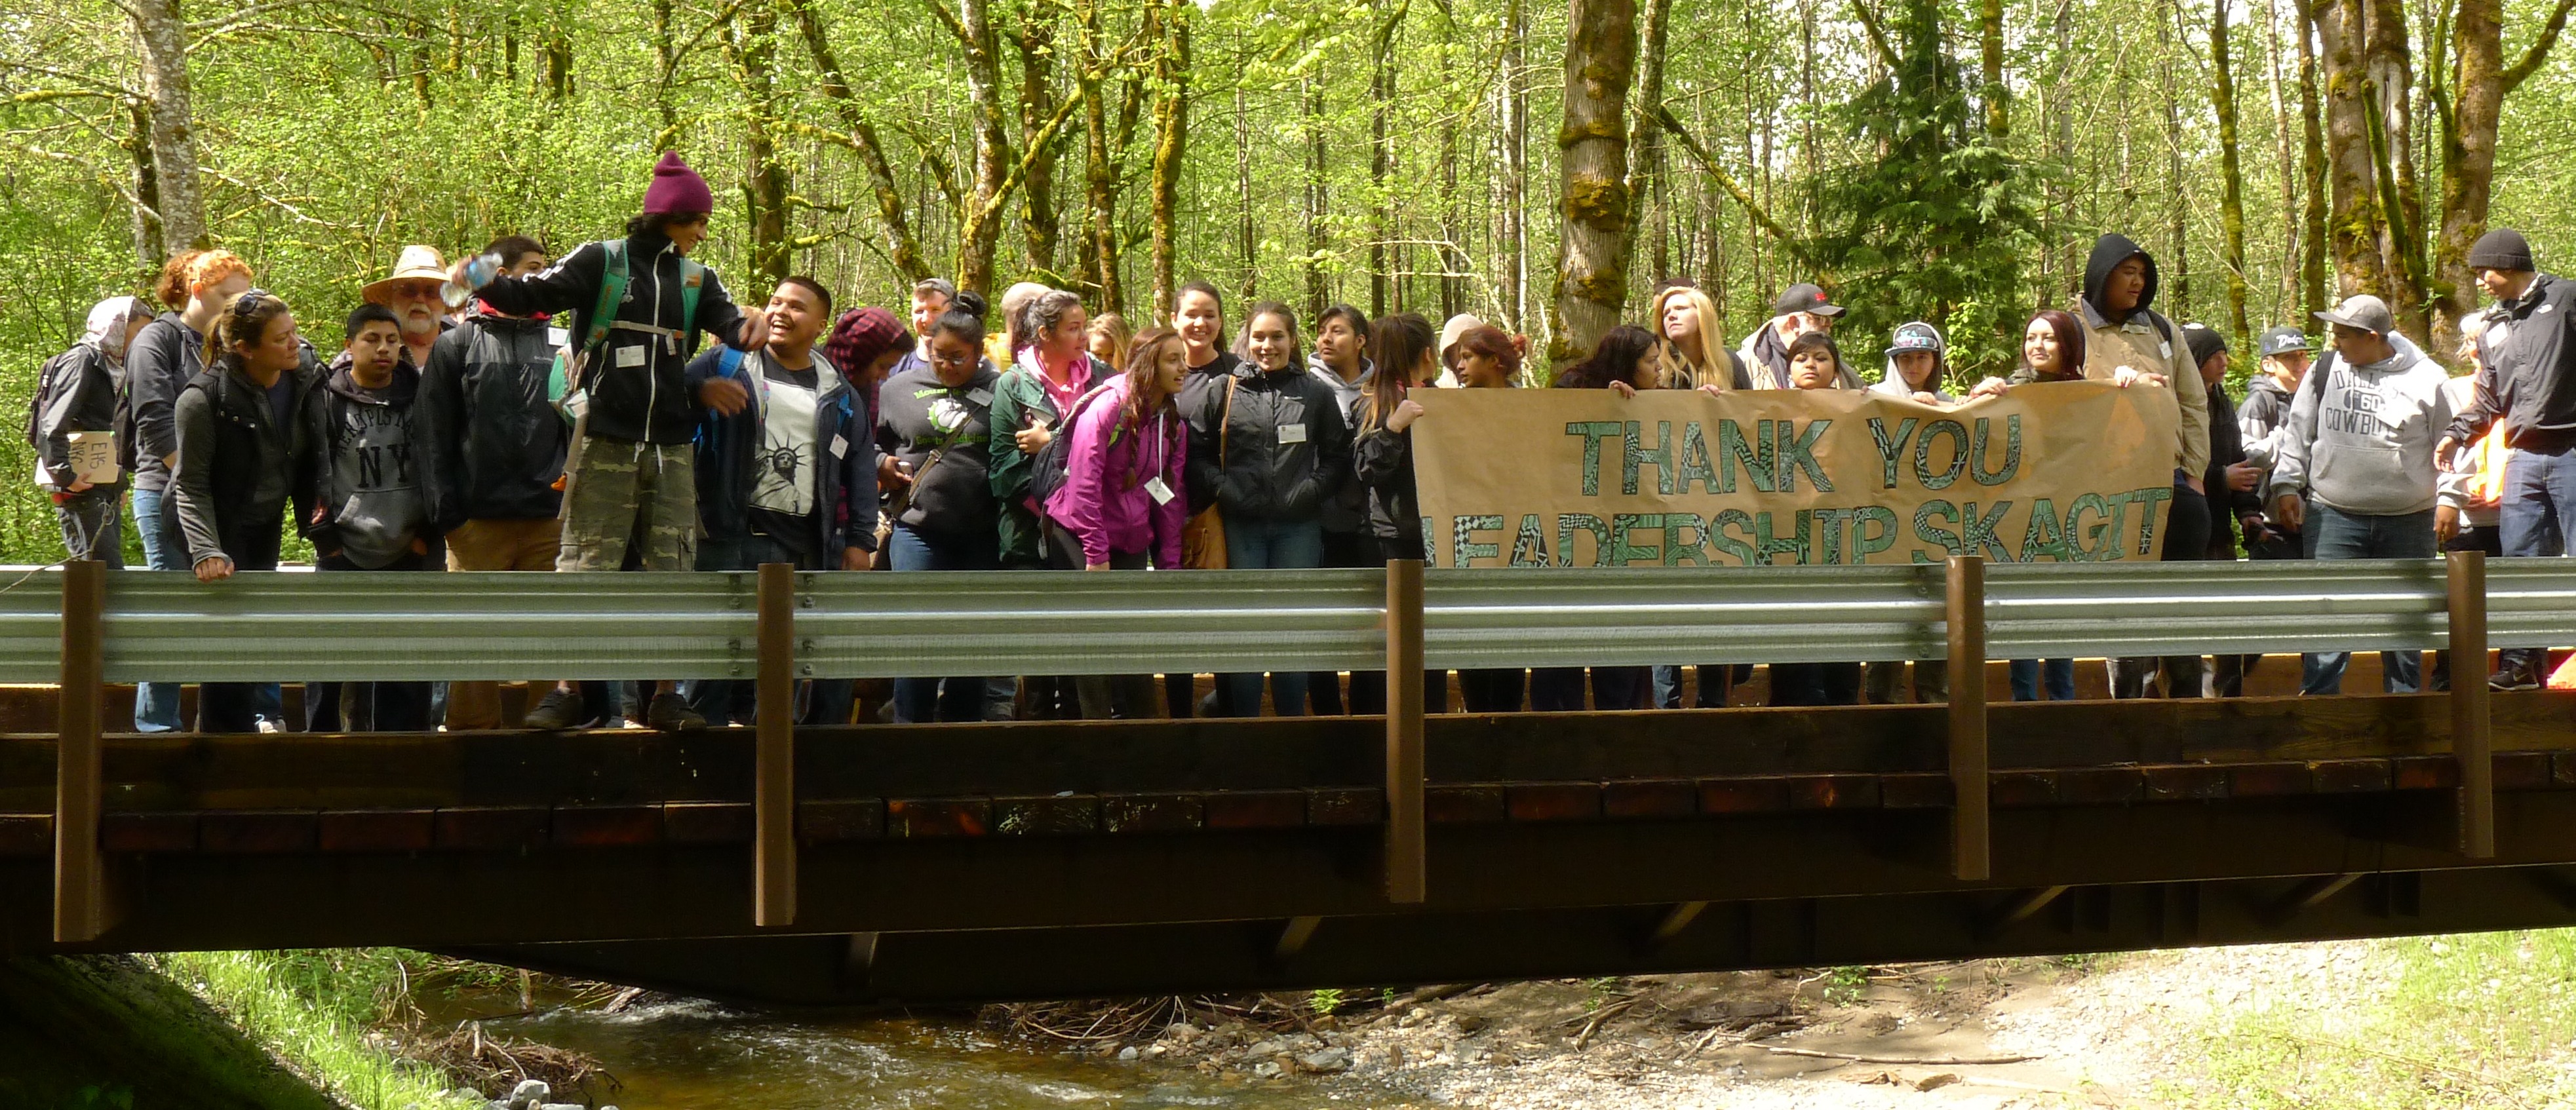 Students from Emerson High School participate in stewardship projects at Cumberland Creek Conservation Area in April 2015. Photograph credit: Skagit Land Trust staff.